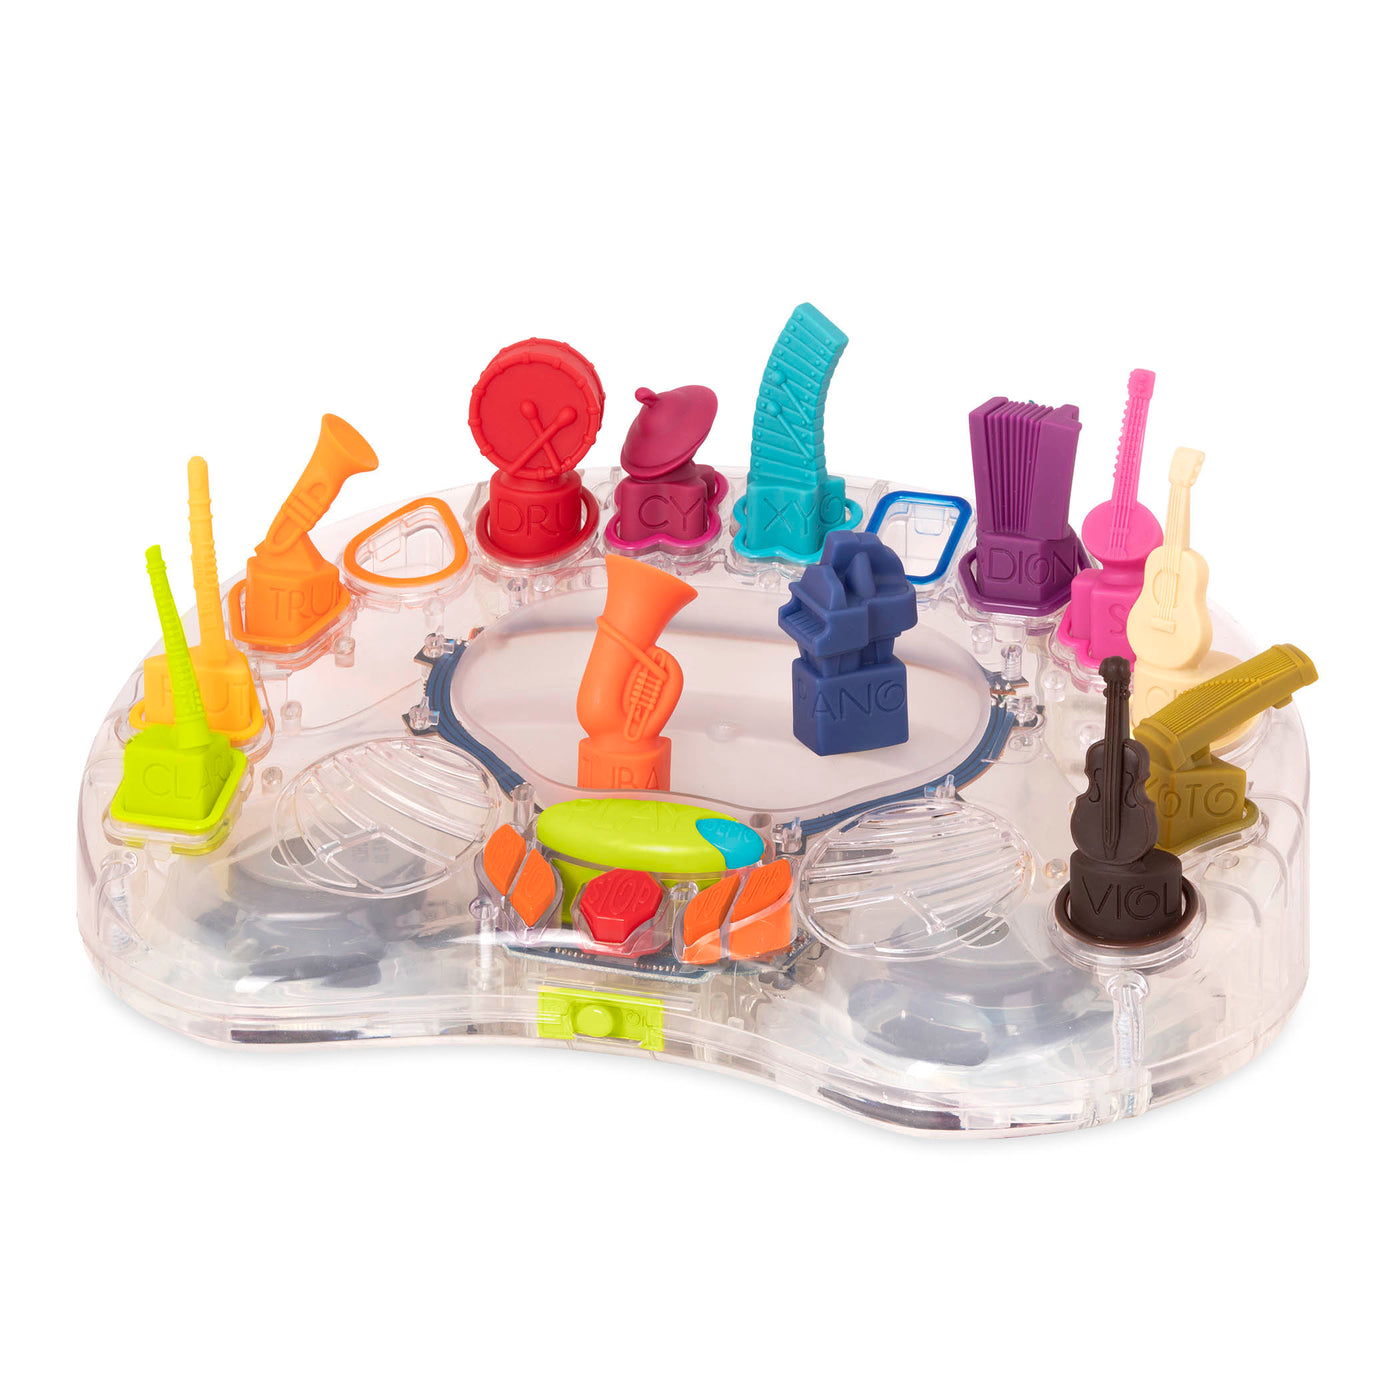 Interactive orchestra toy.